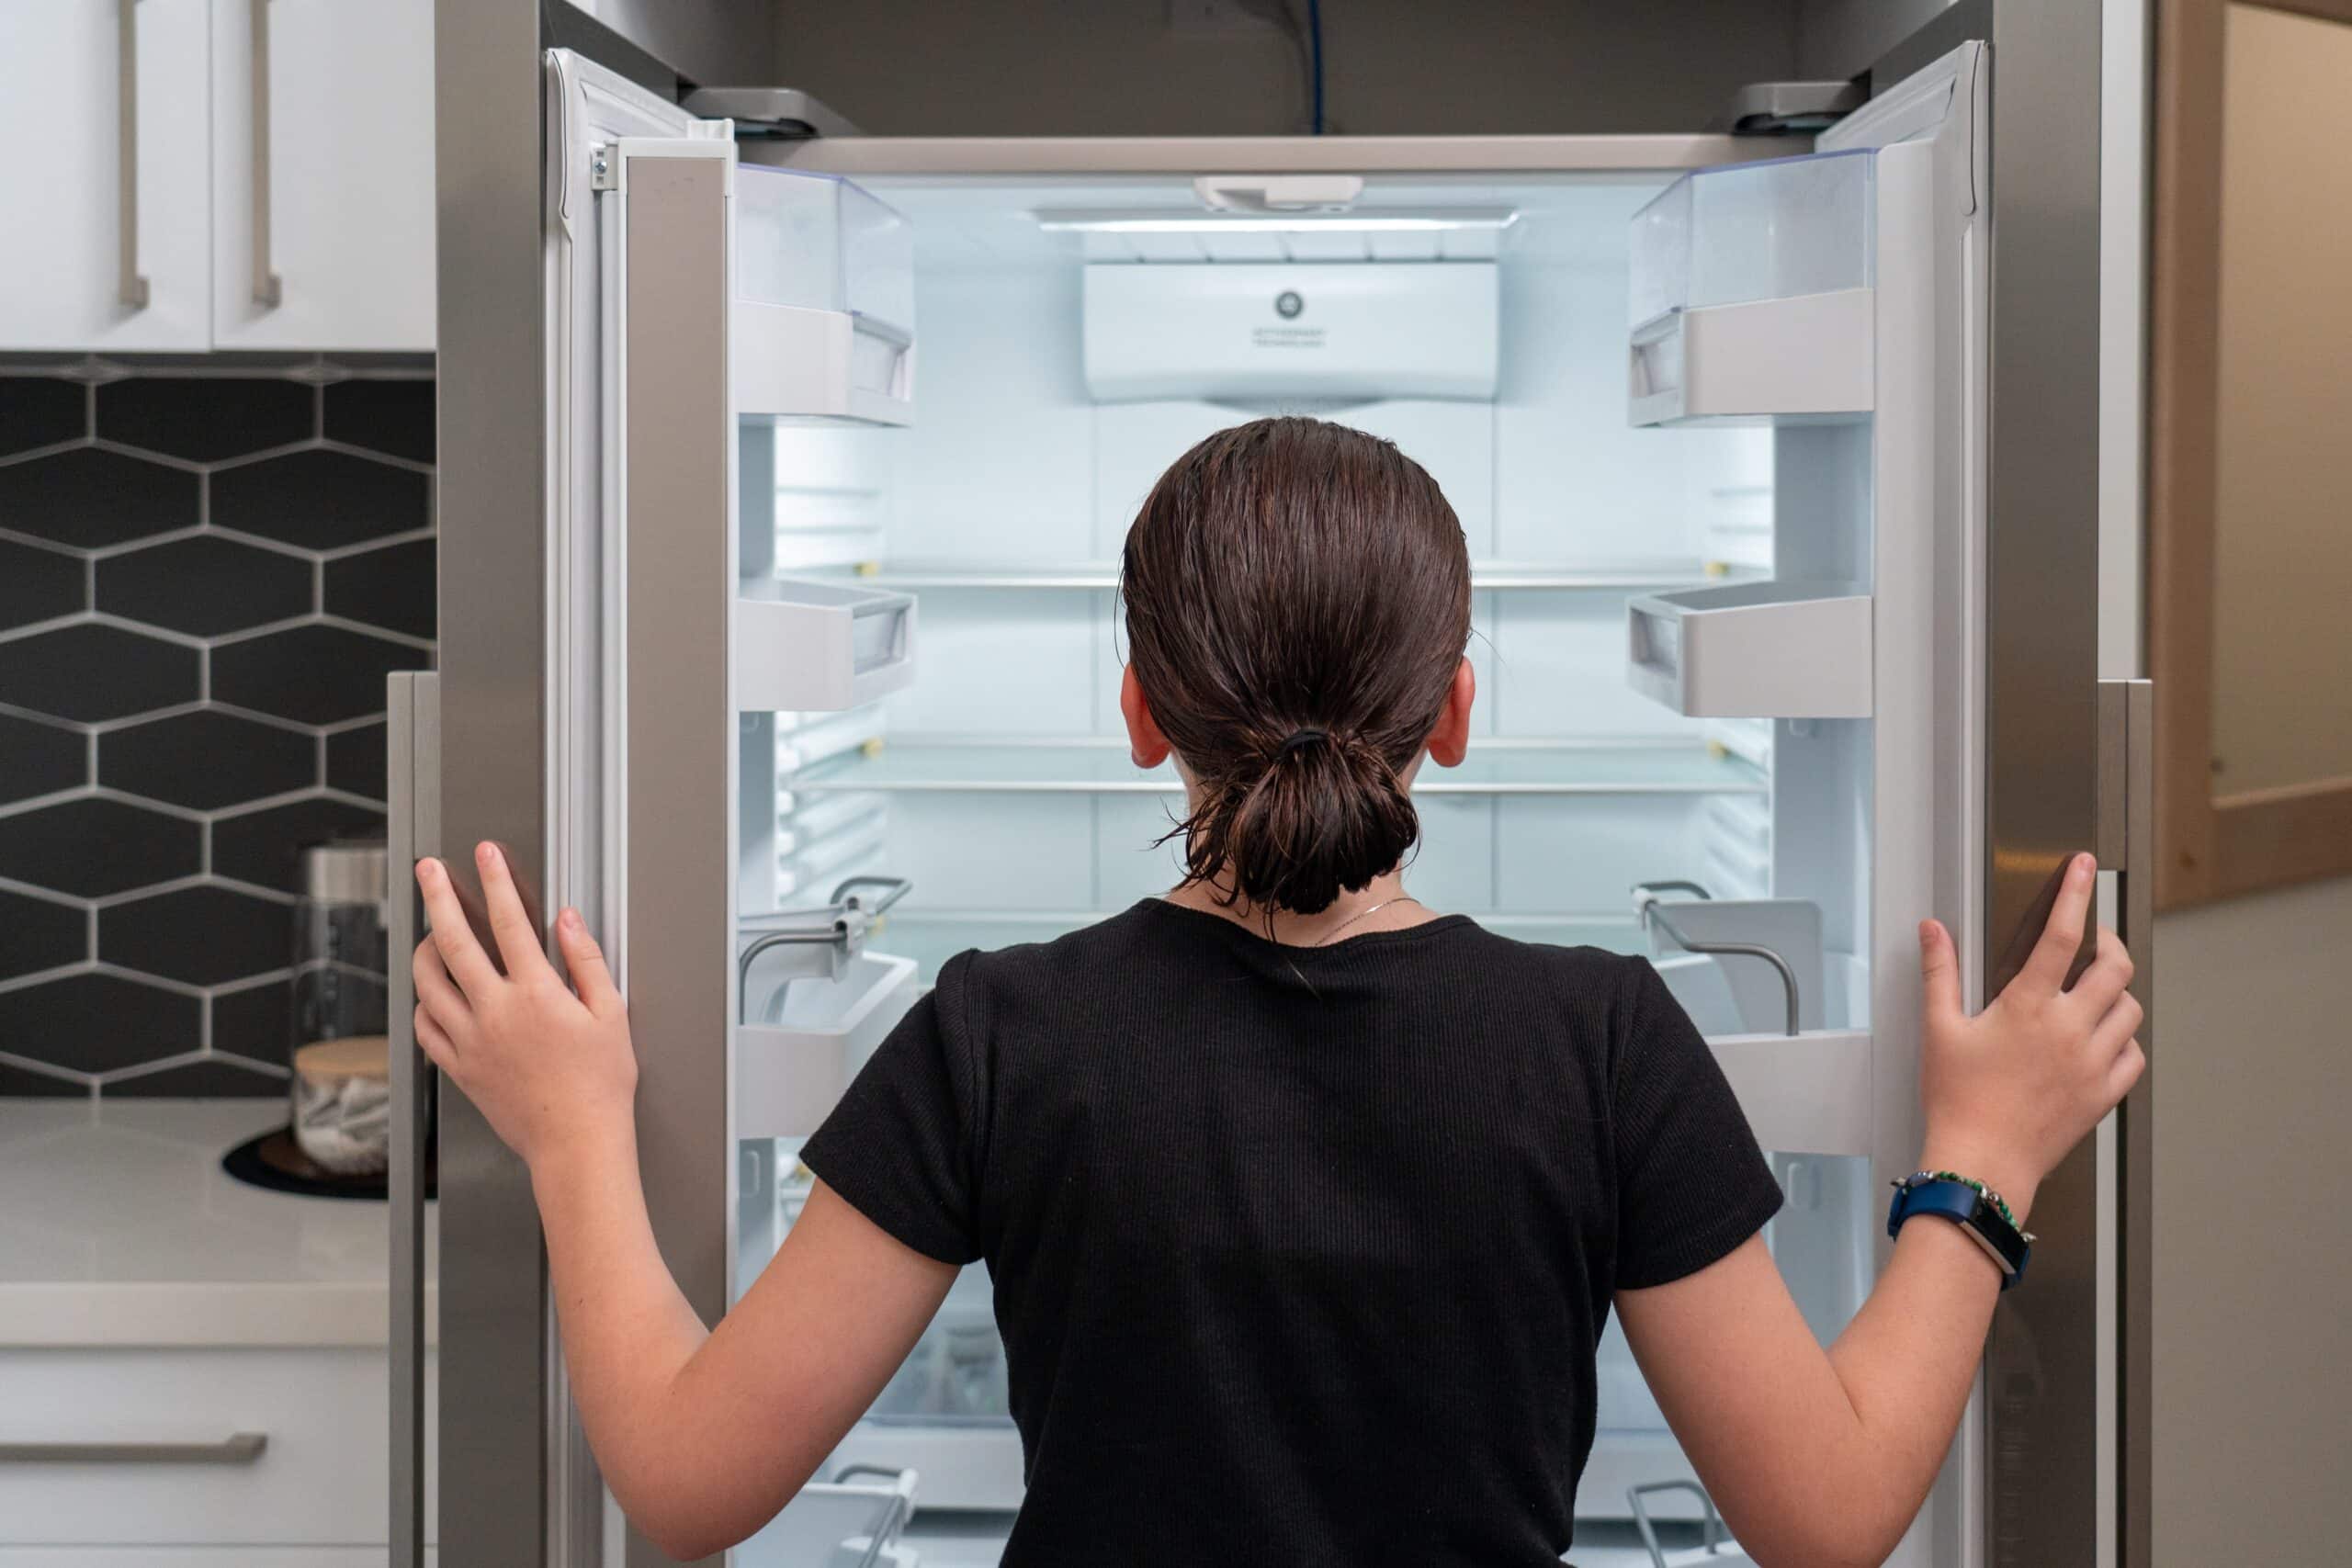 young girl looking into an empty refrigerator frid 2022 10 31 05 59 54 utc